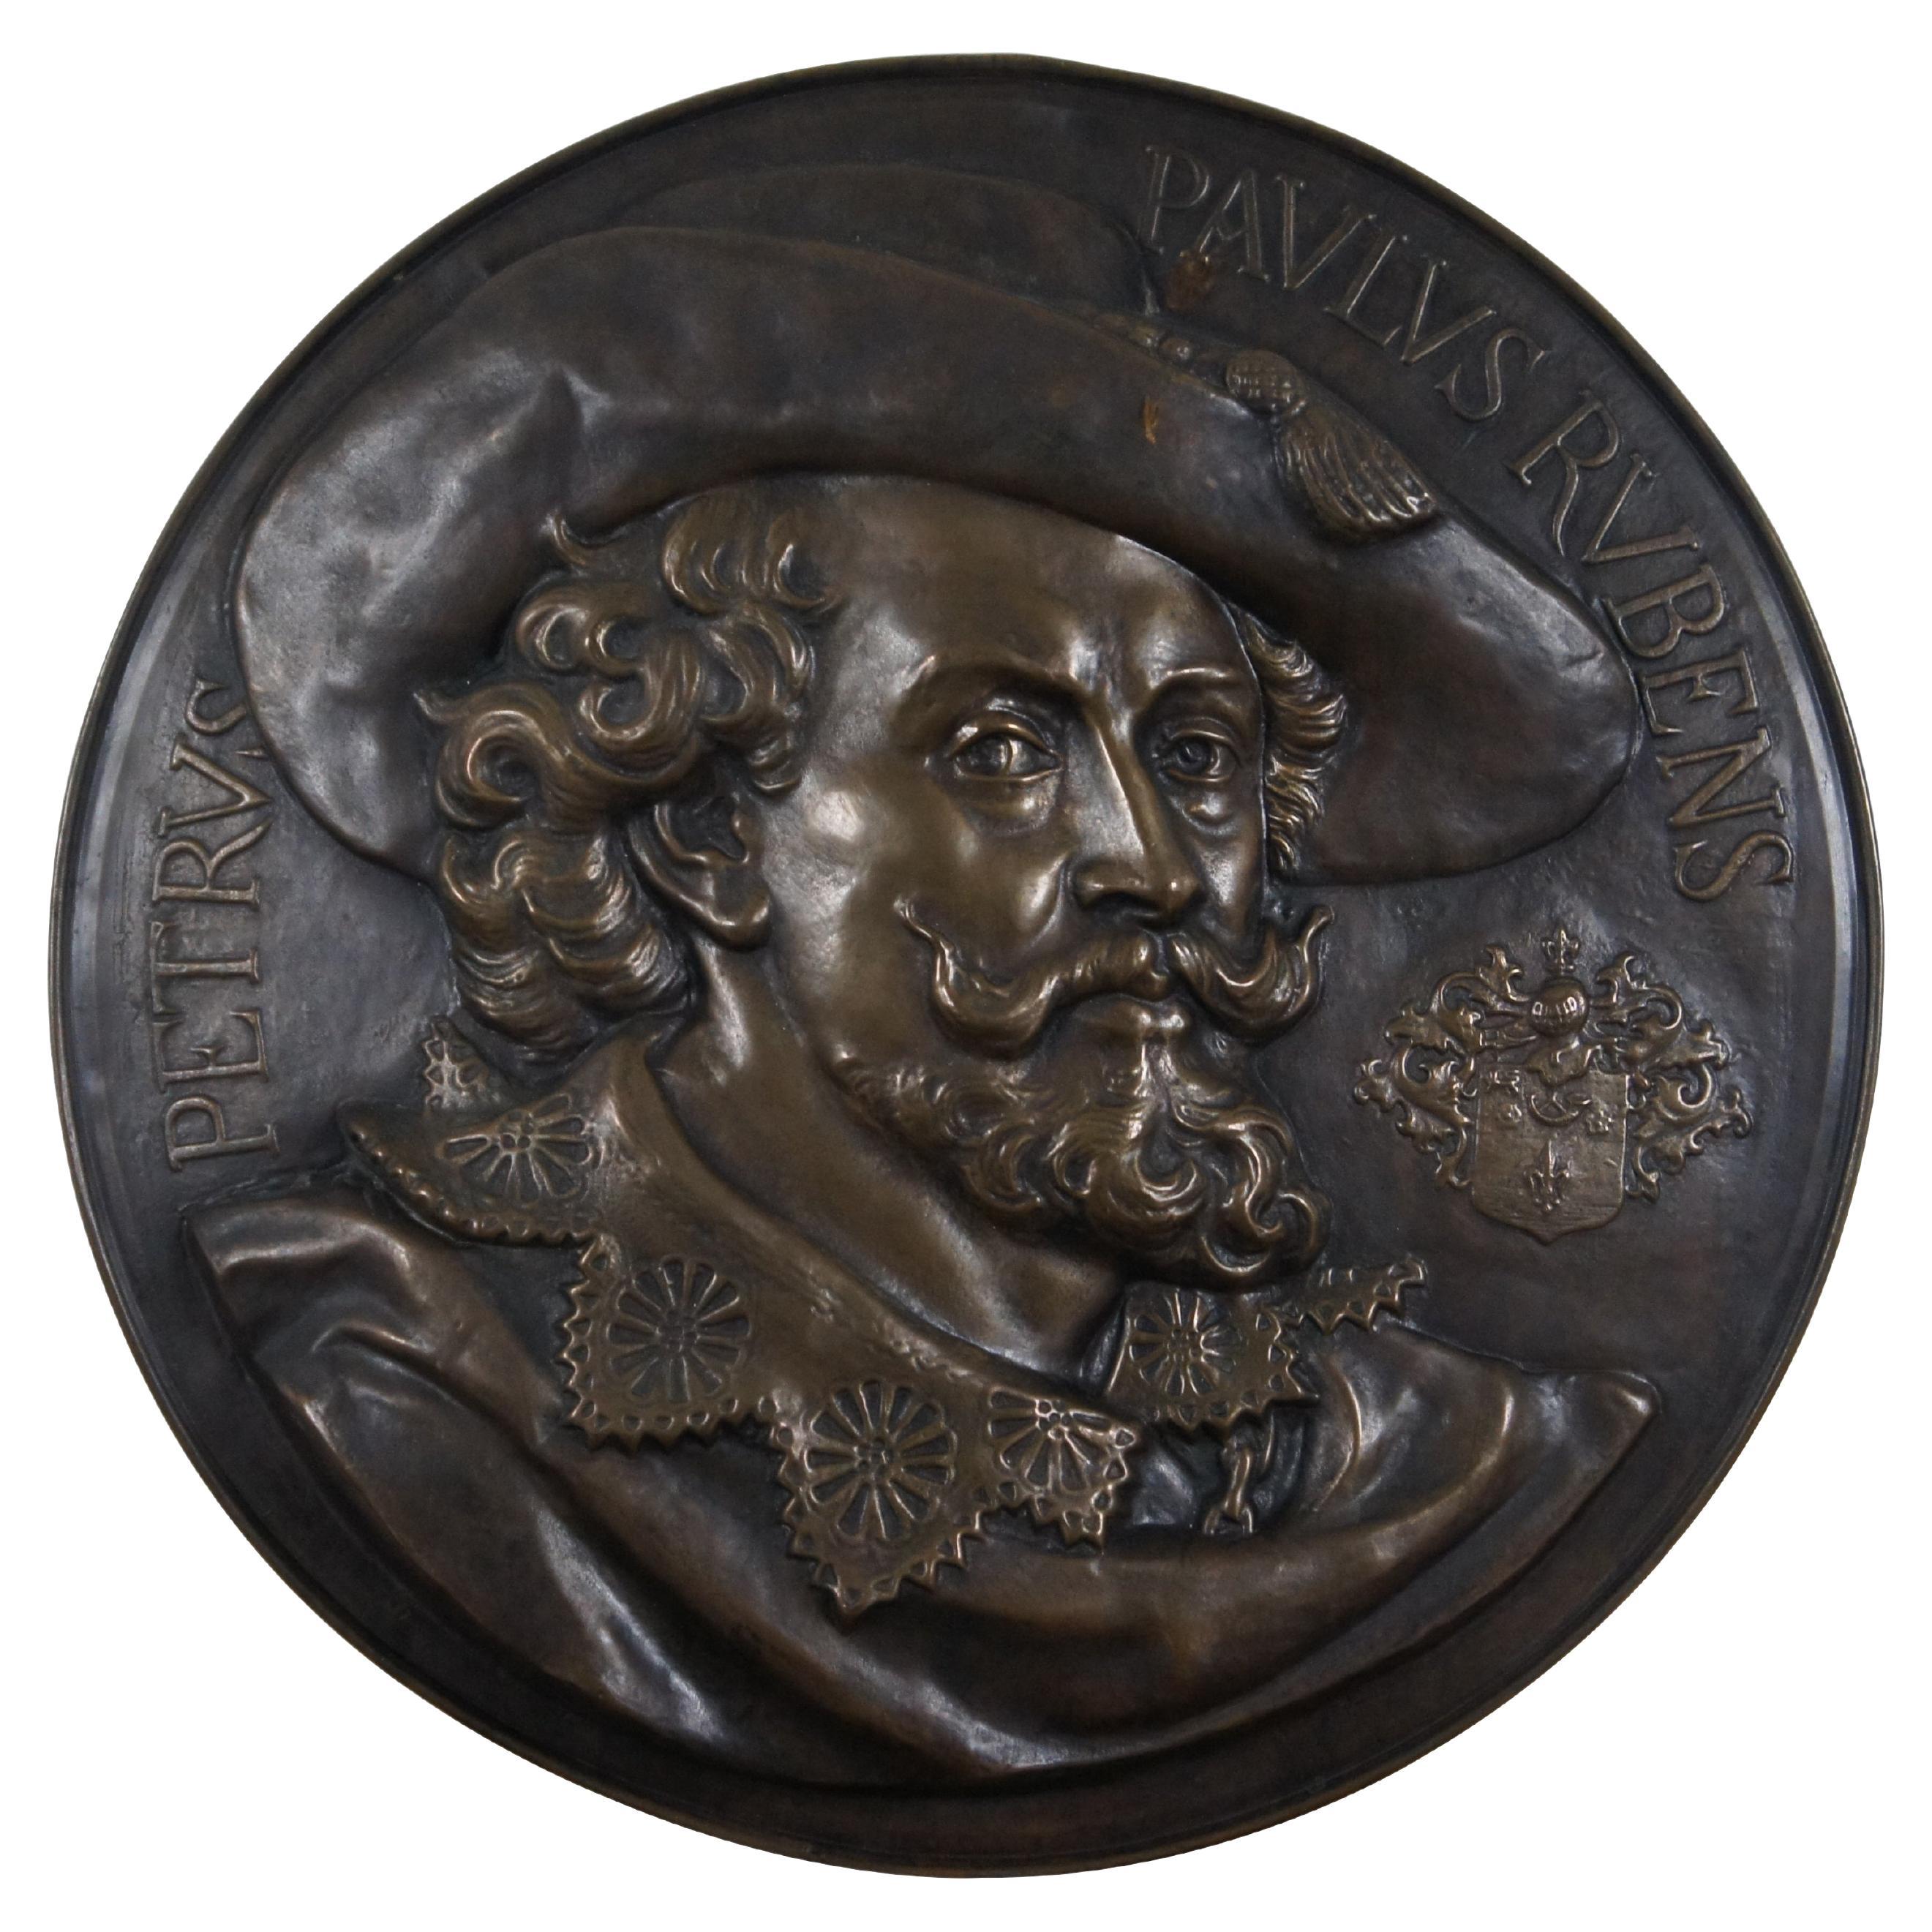 Antique Peter Paul Rubens Copper Embossed High Relief Wall Plaque Medallion 25" For Sale